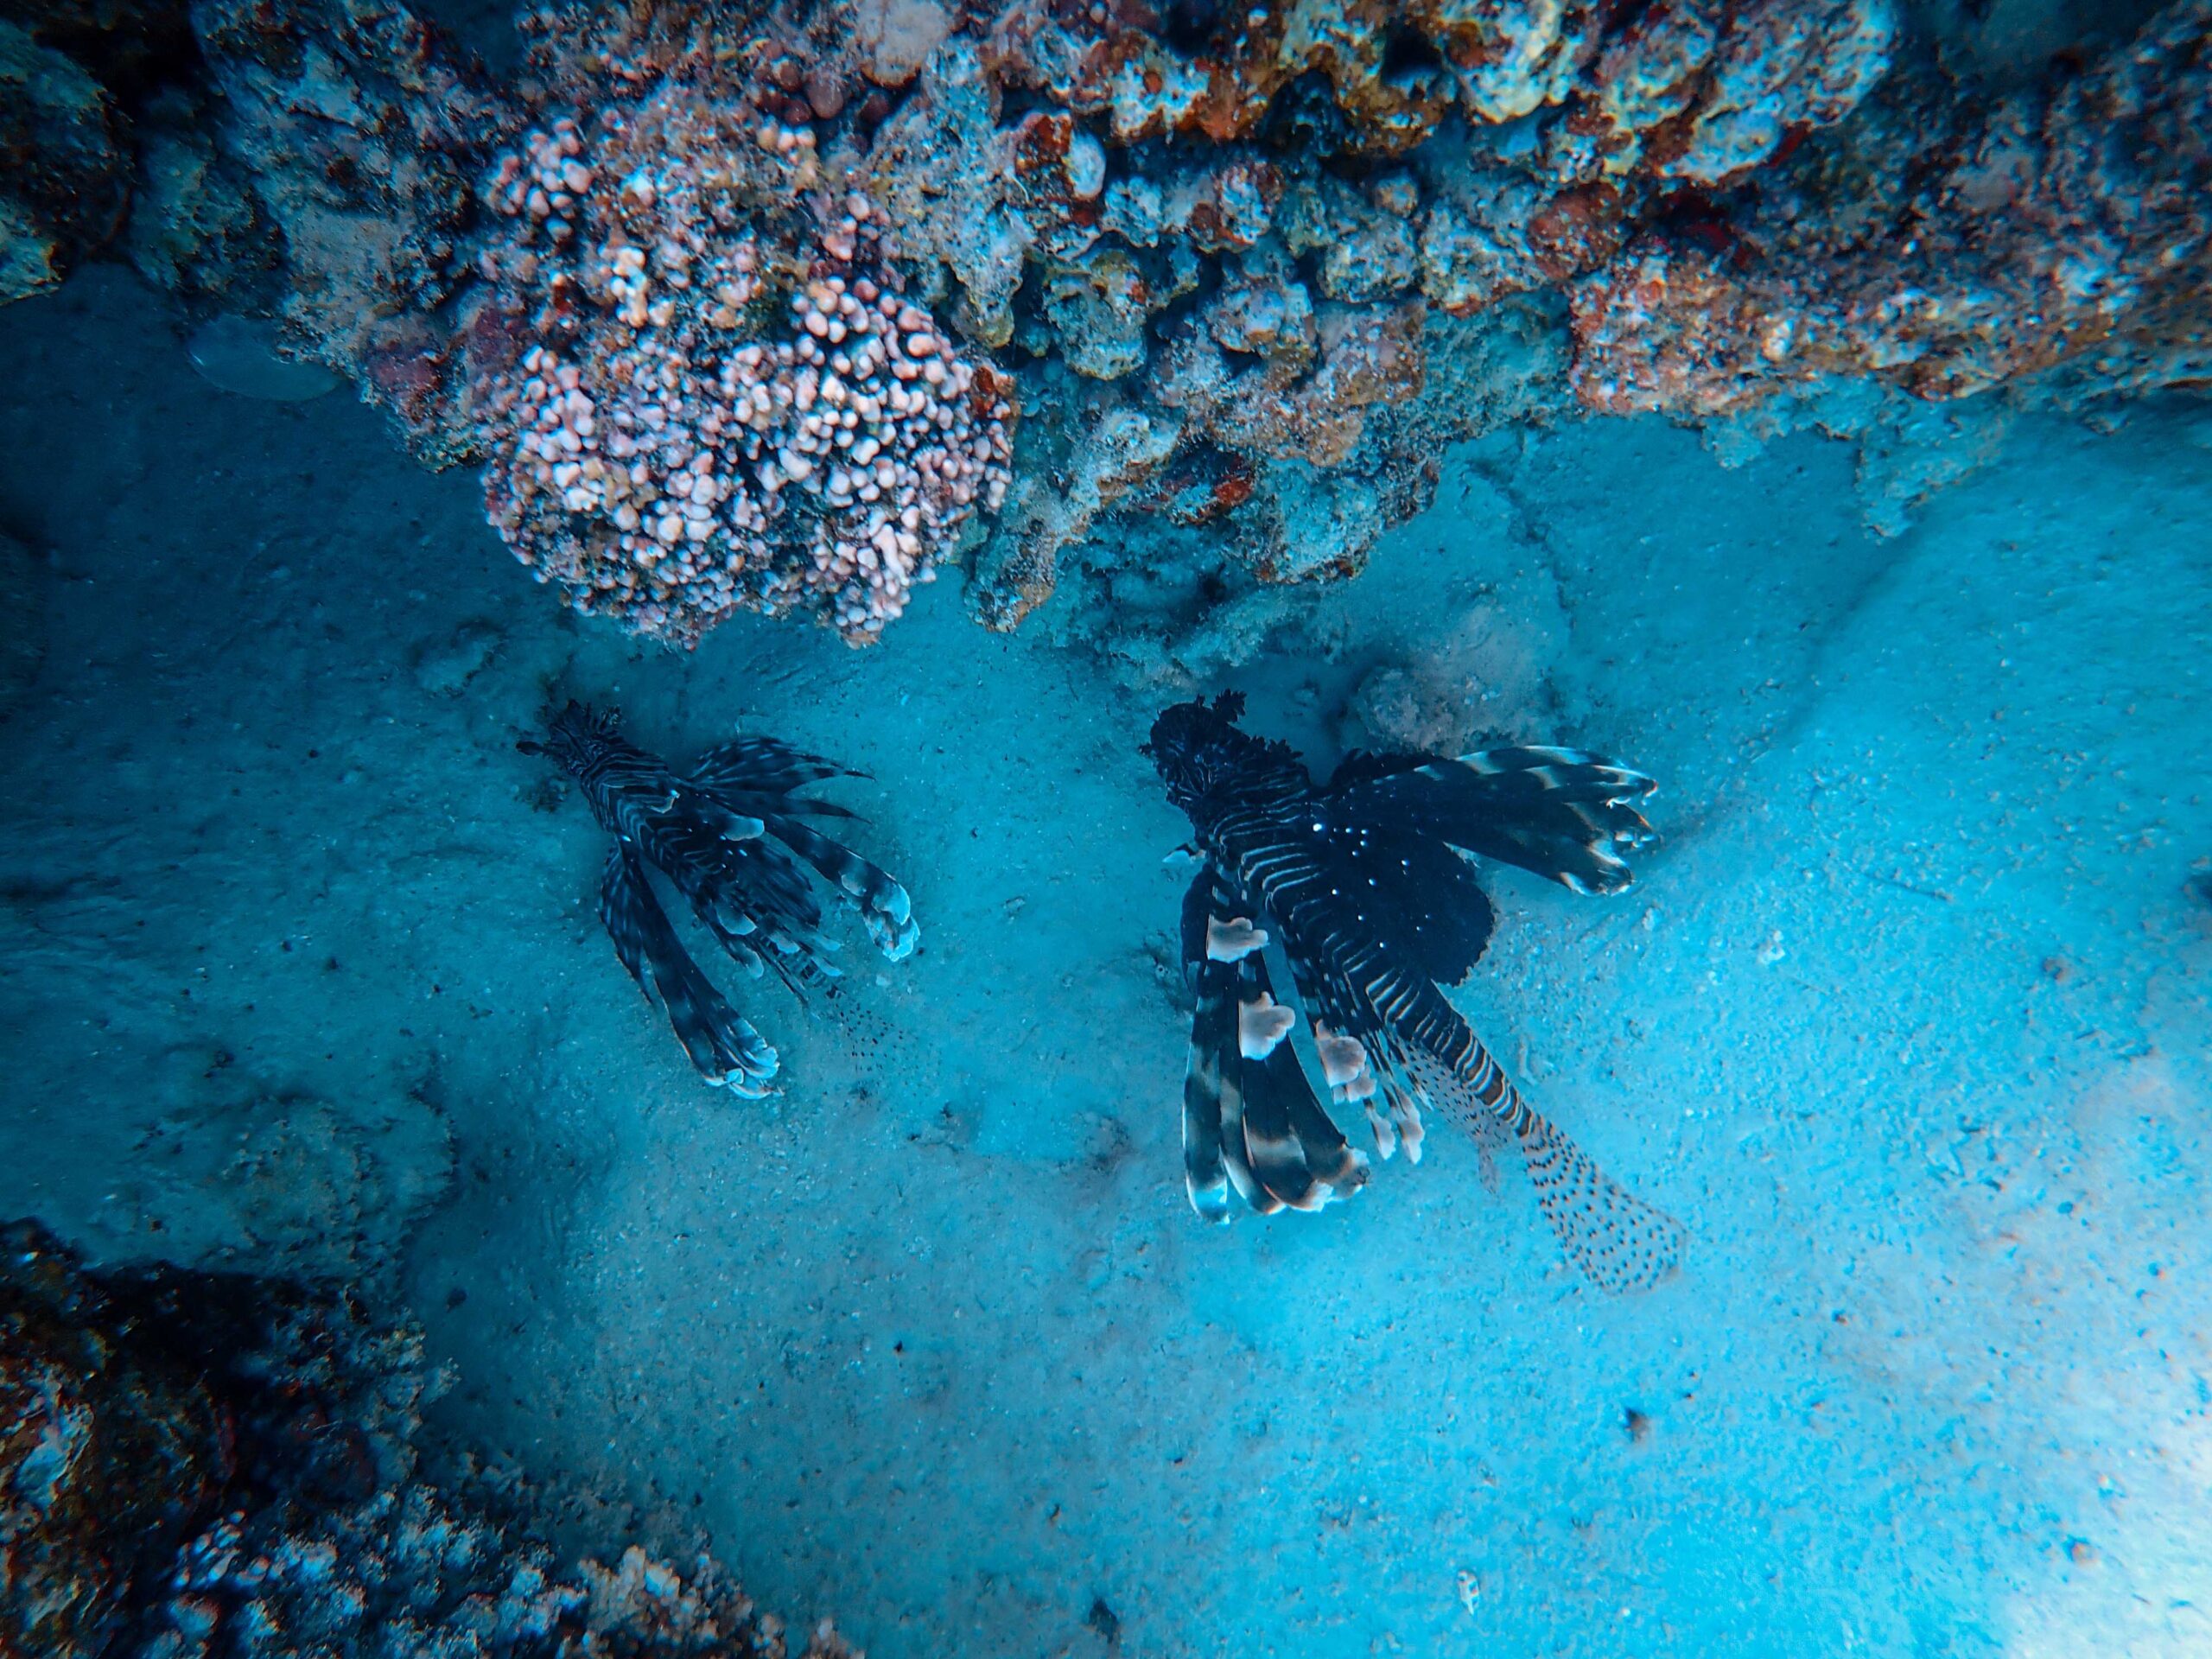 Photo by Francesco Ungaro: https://www.pexels.com/photo/fishes-and-coral-reefs-in-depth-of-blue-sea-3805131/